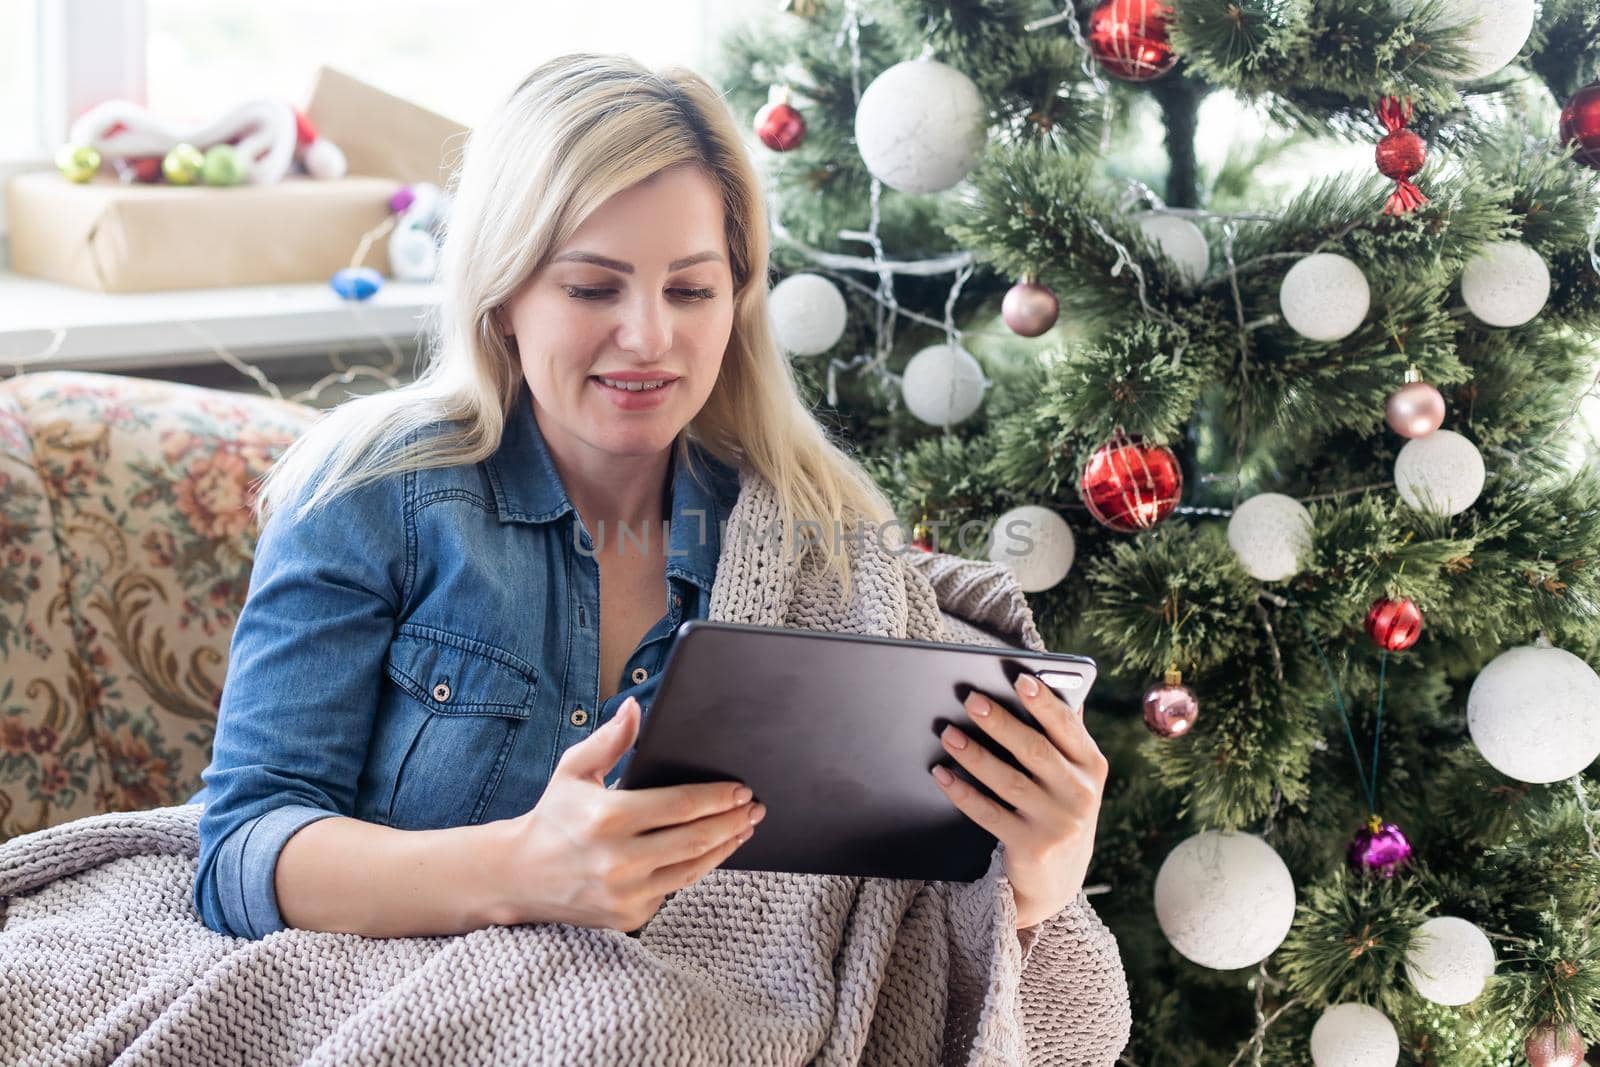 Cute young smiling woman using tablet and happy smiling during cozy Xmas holidays at home